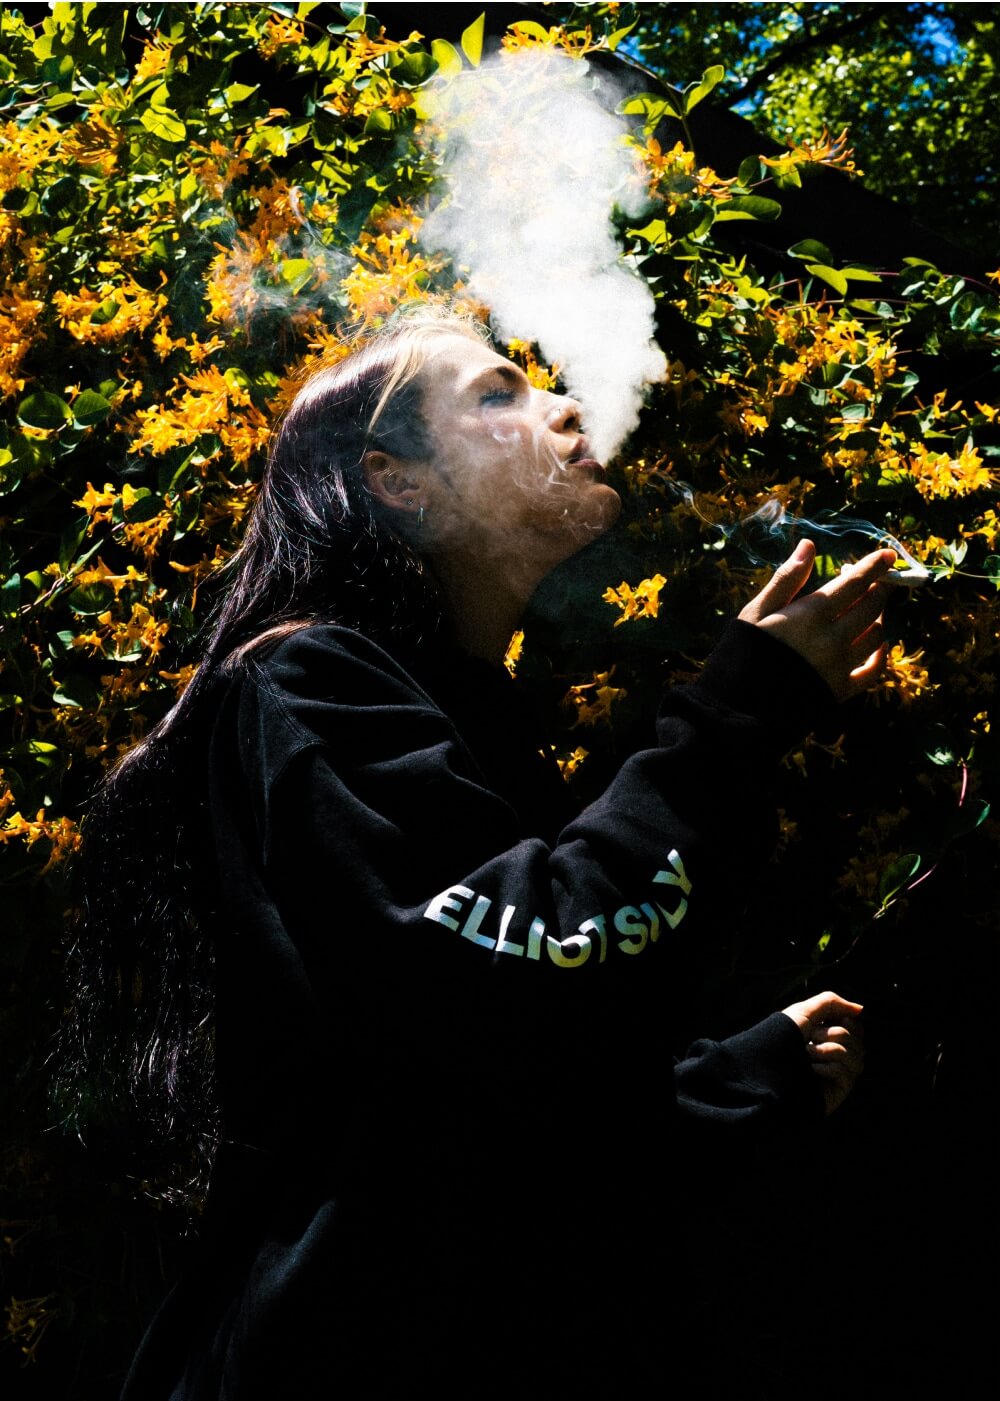 A Girl posing with elliot logo hoodie and smoking rolled cigarettes using Elliot's rolling papers